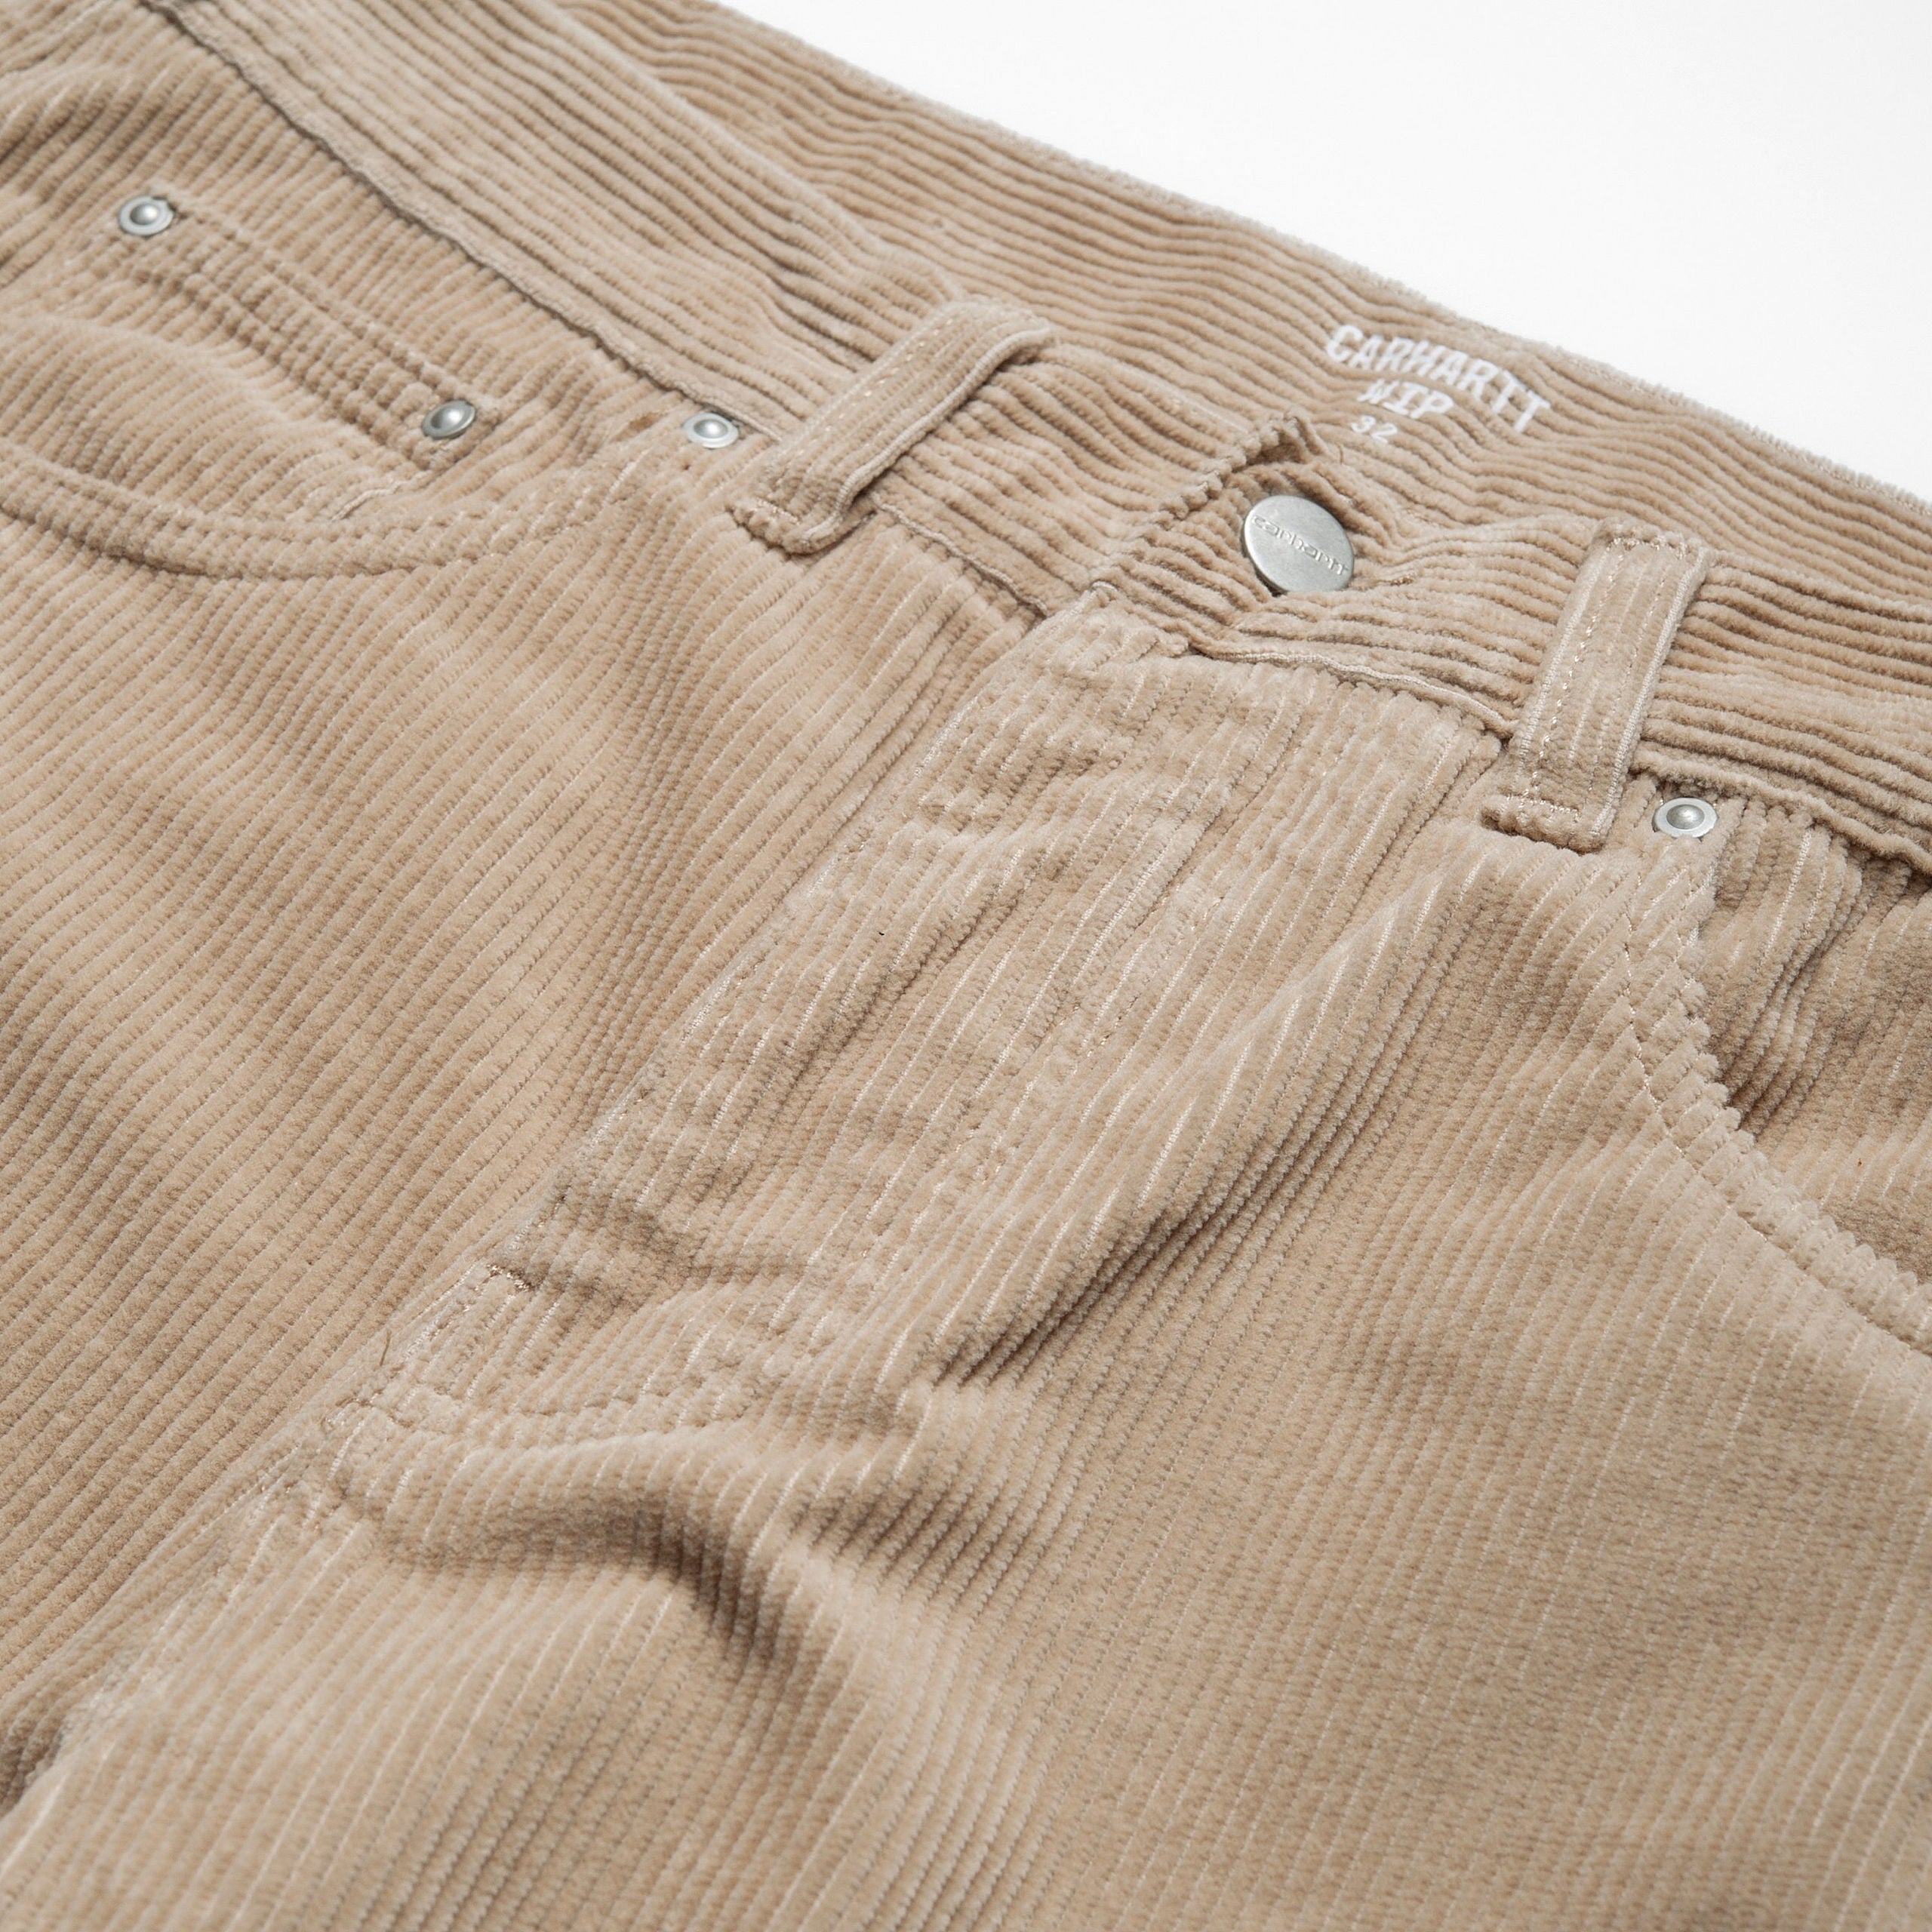 Carhartt WIP Newel Cord Pant (wall rinsed) - Blue Mountain Store